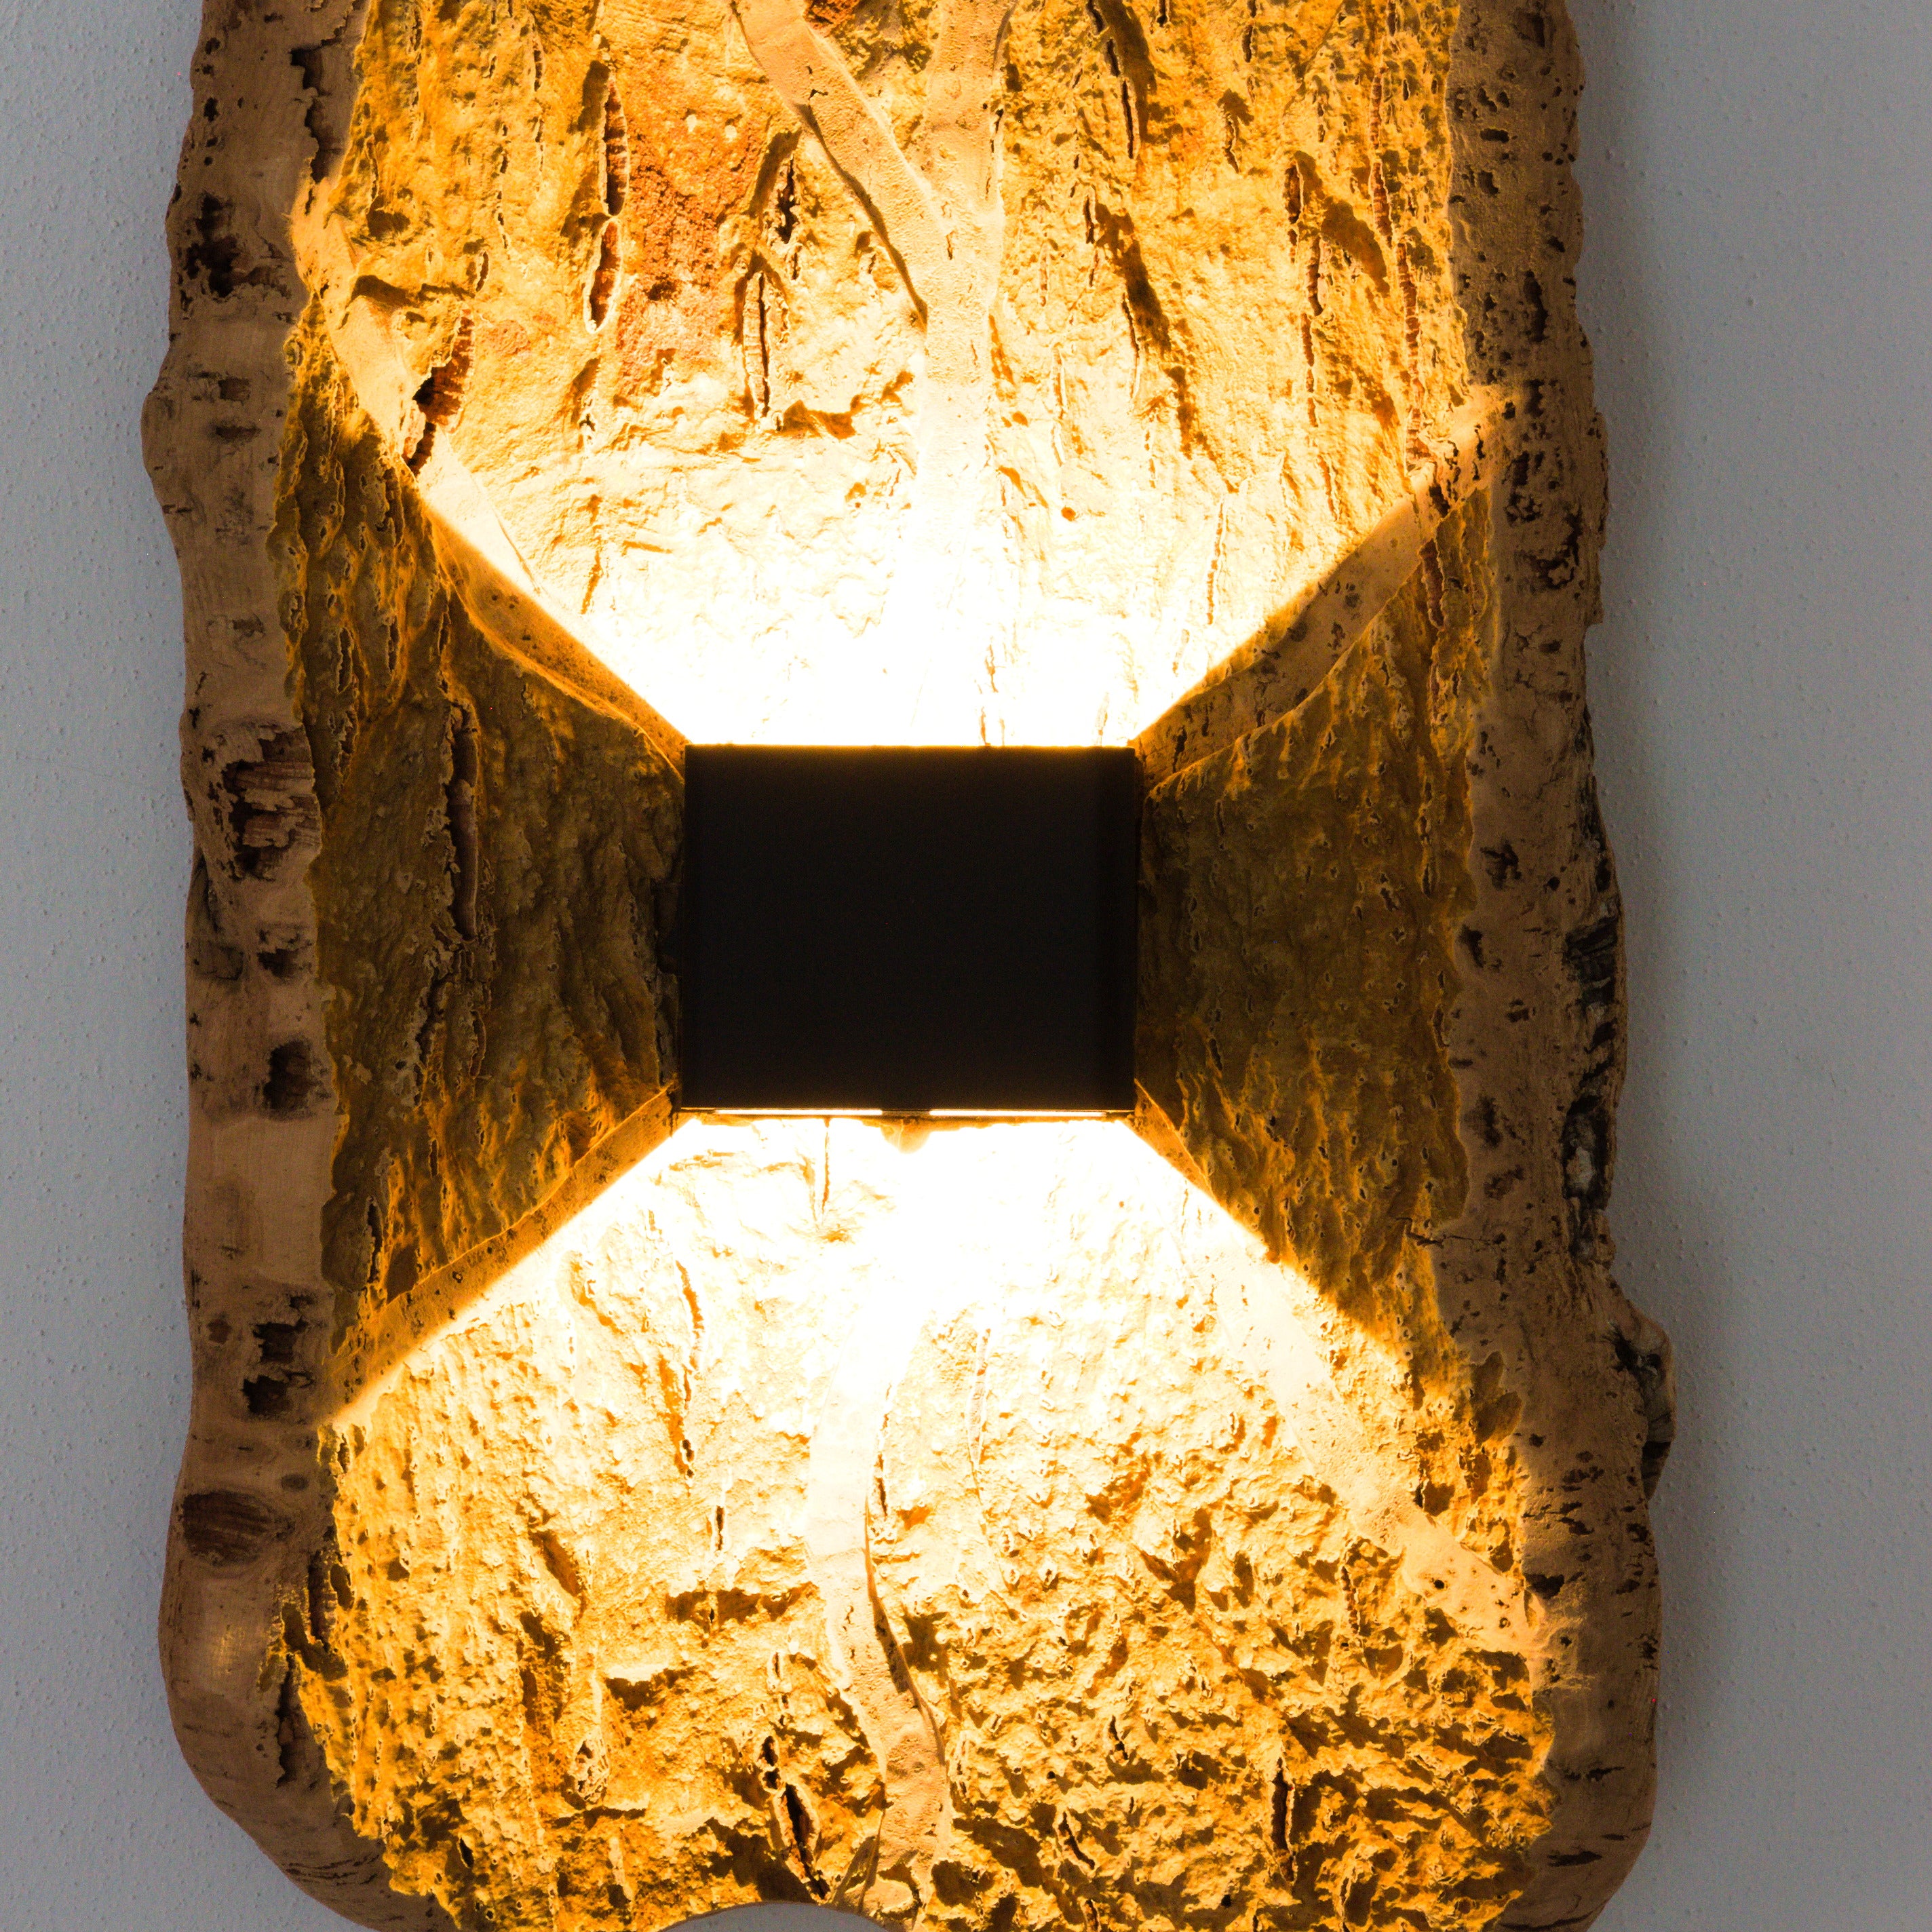 verKORKst premium wireless wall lamp made of cork bark * rechargeable battery * motion sensor * exclusive vintage wall lamp in country style